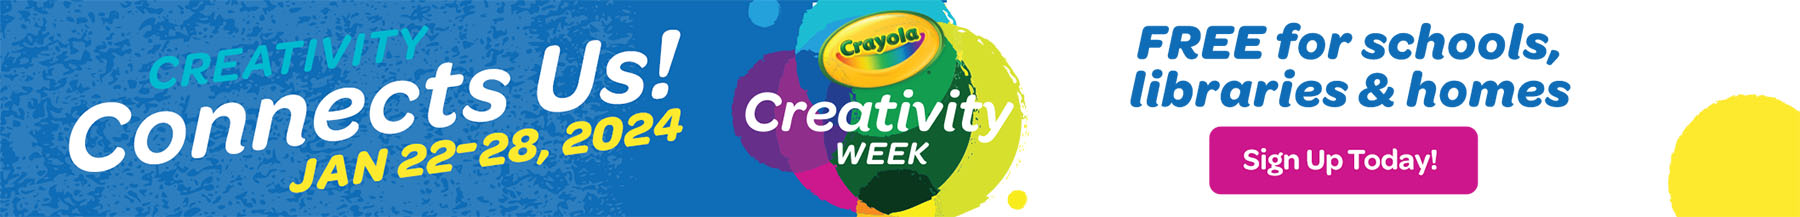 Creativity Connects Us! January 22-28, 2024 is Creativity Week. Free for schools, libraries & homes. Sign Up Today!